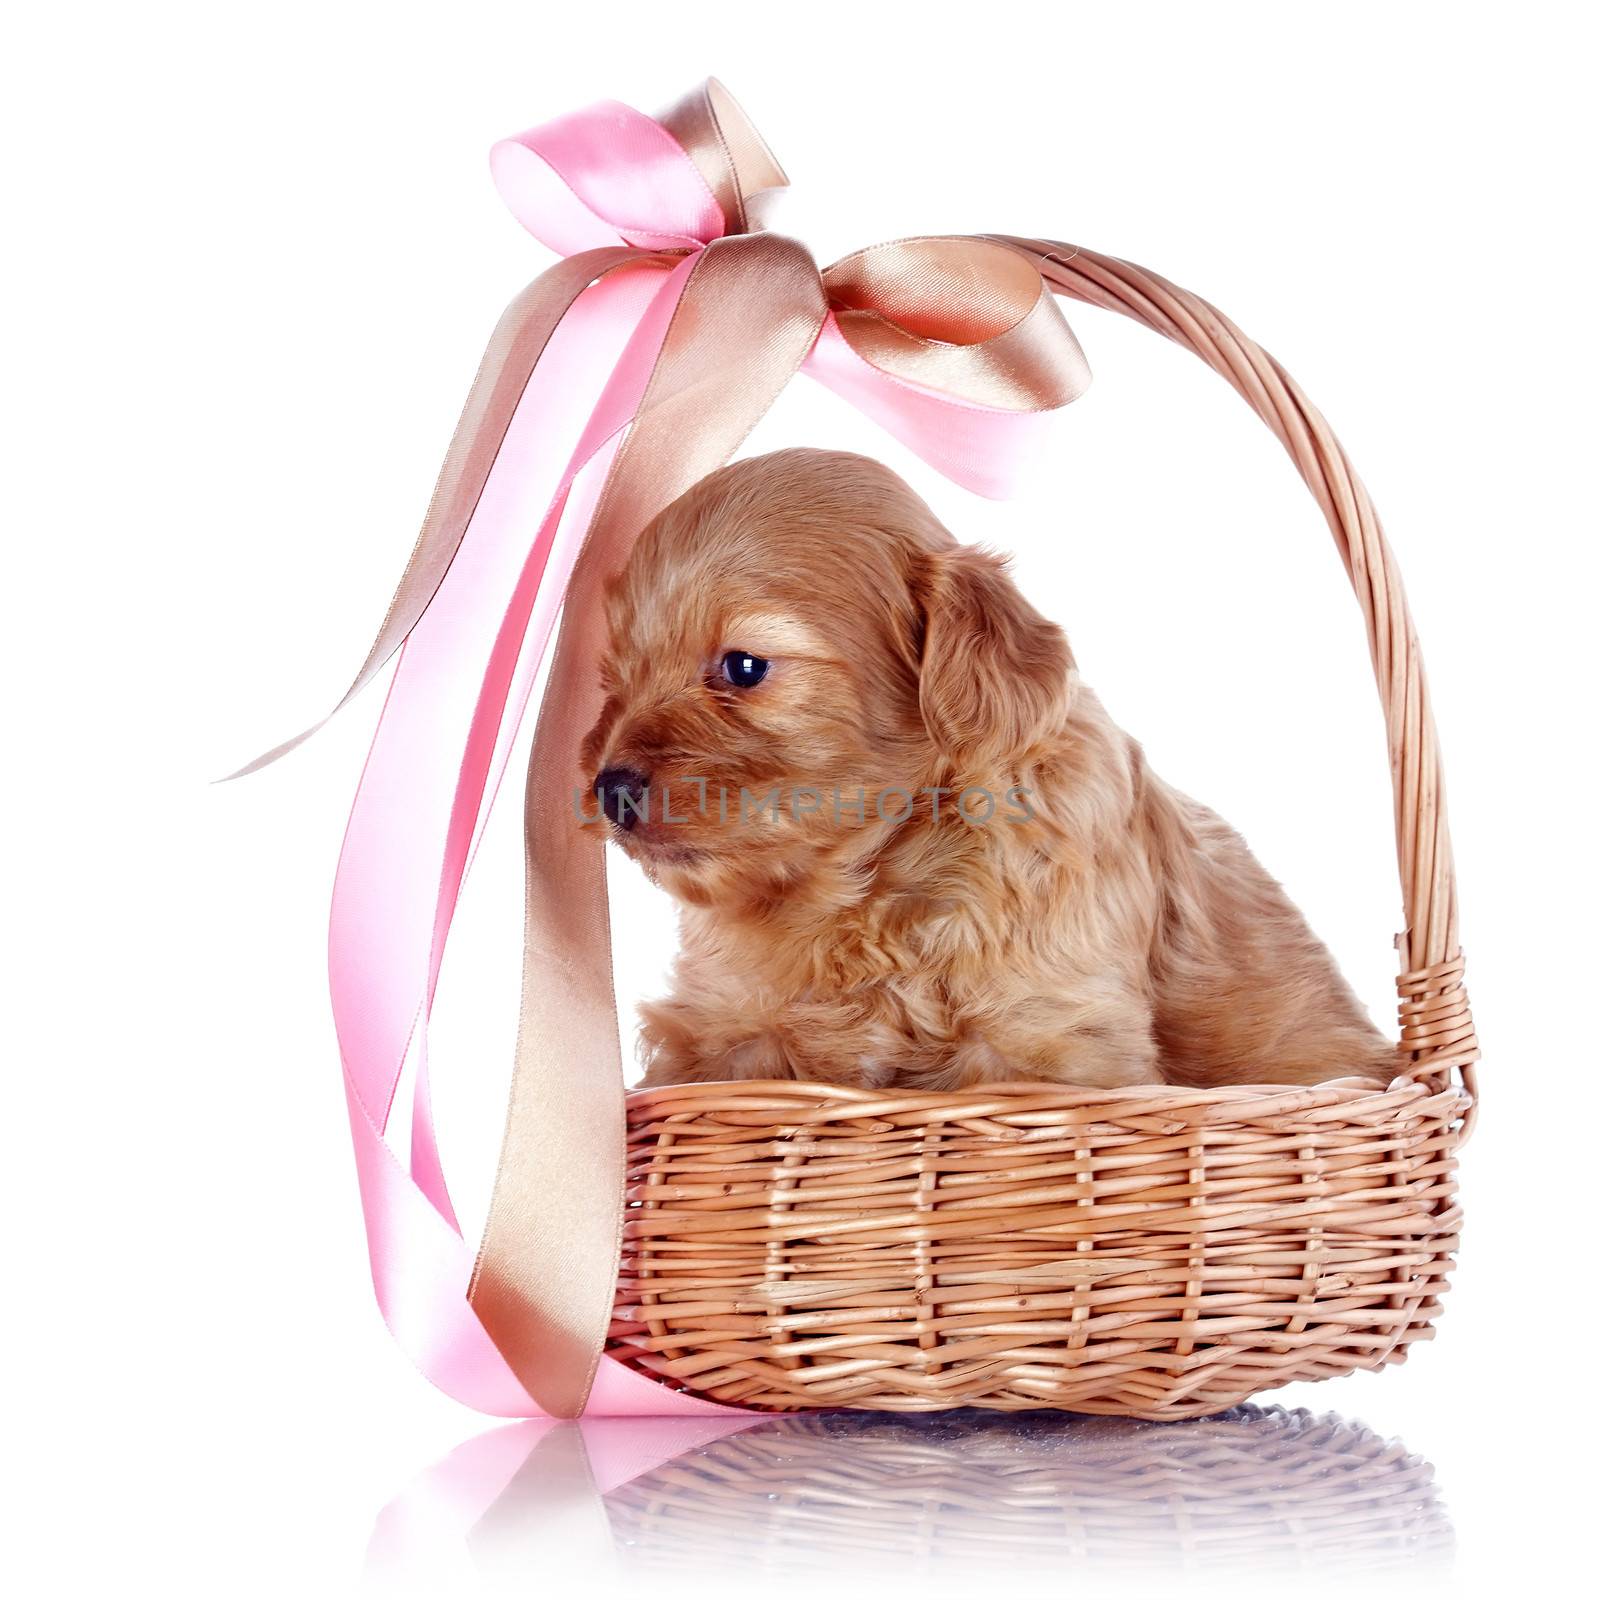 Puppy in a wattled basket with a bow. Puppy of a decorative doggie. Decorative dog. Puppy of the Petersburg orchid on a white background